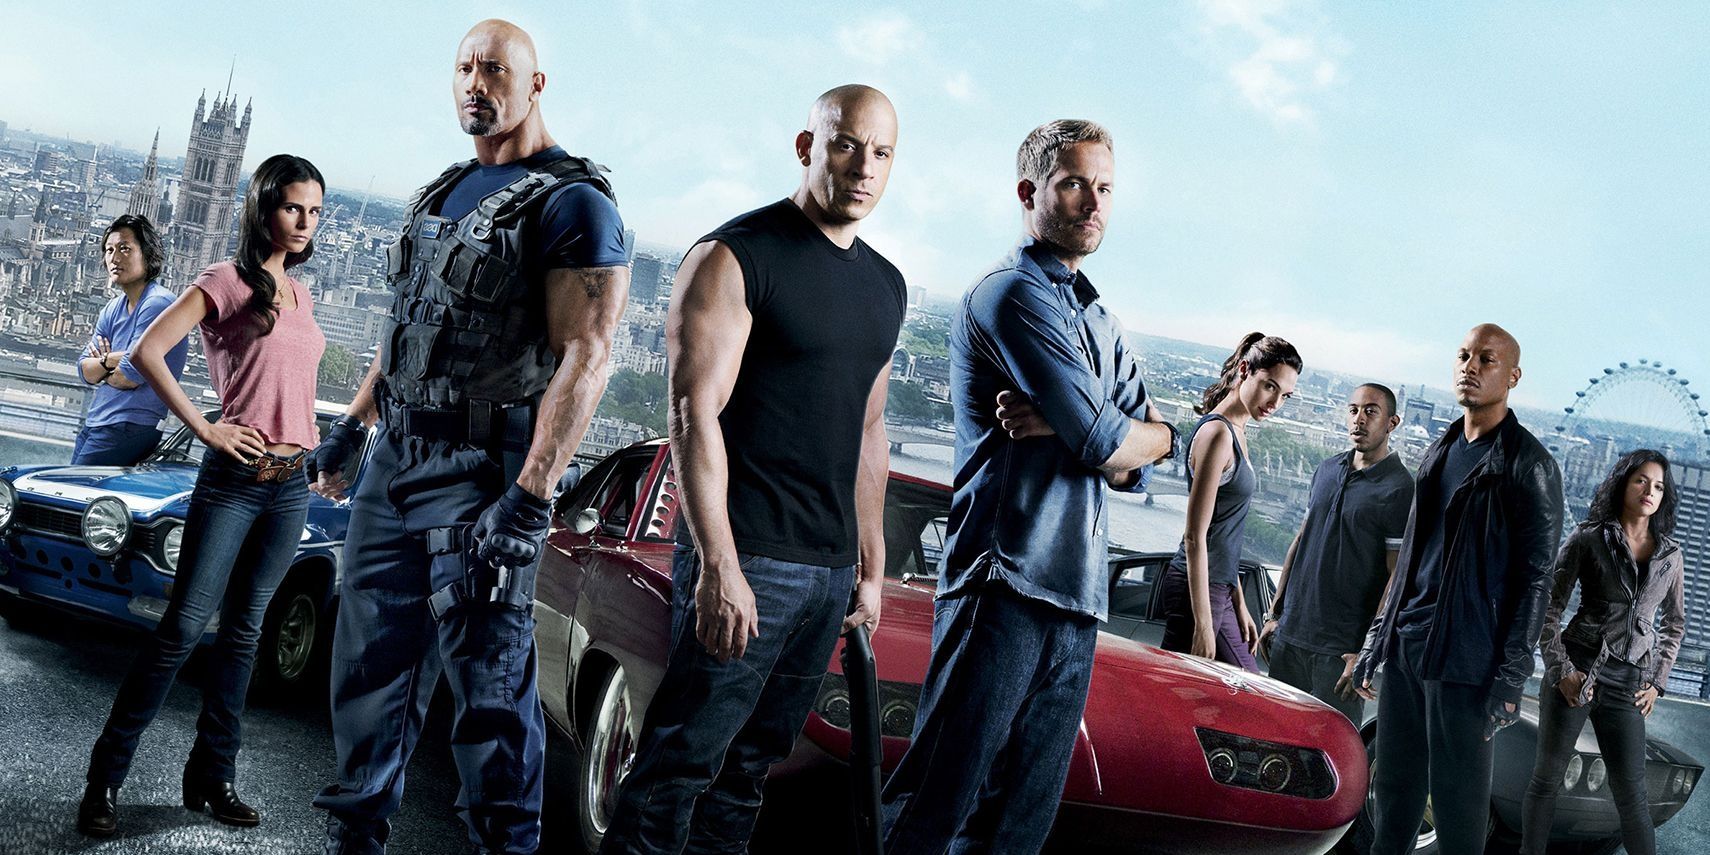 Main cast of the Fast and Furious movies